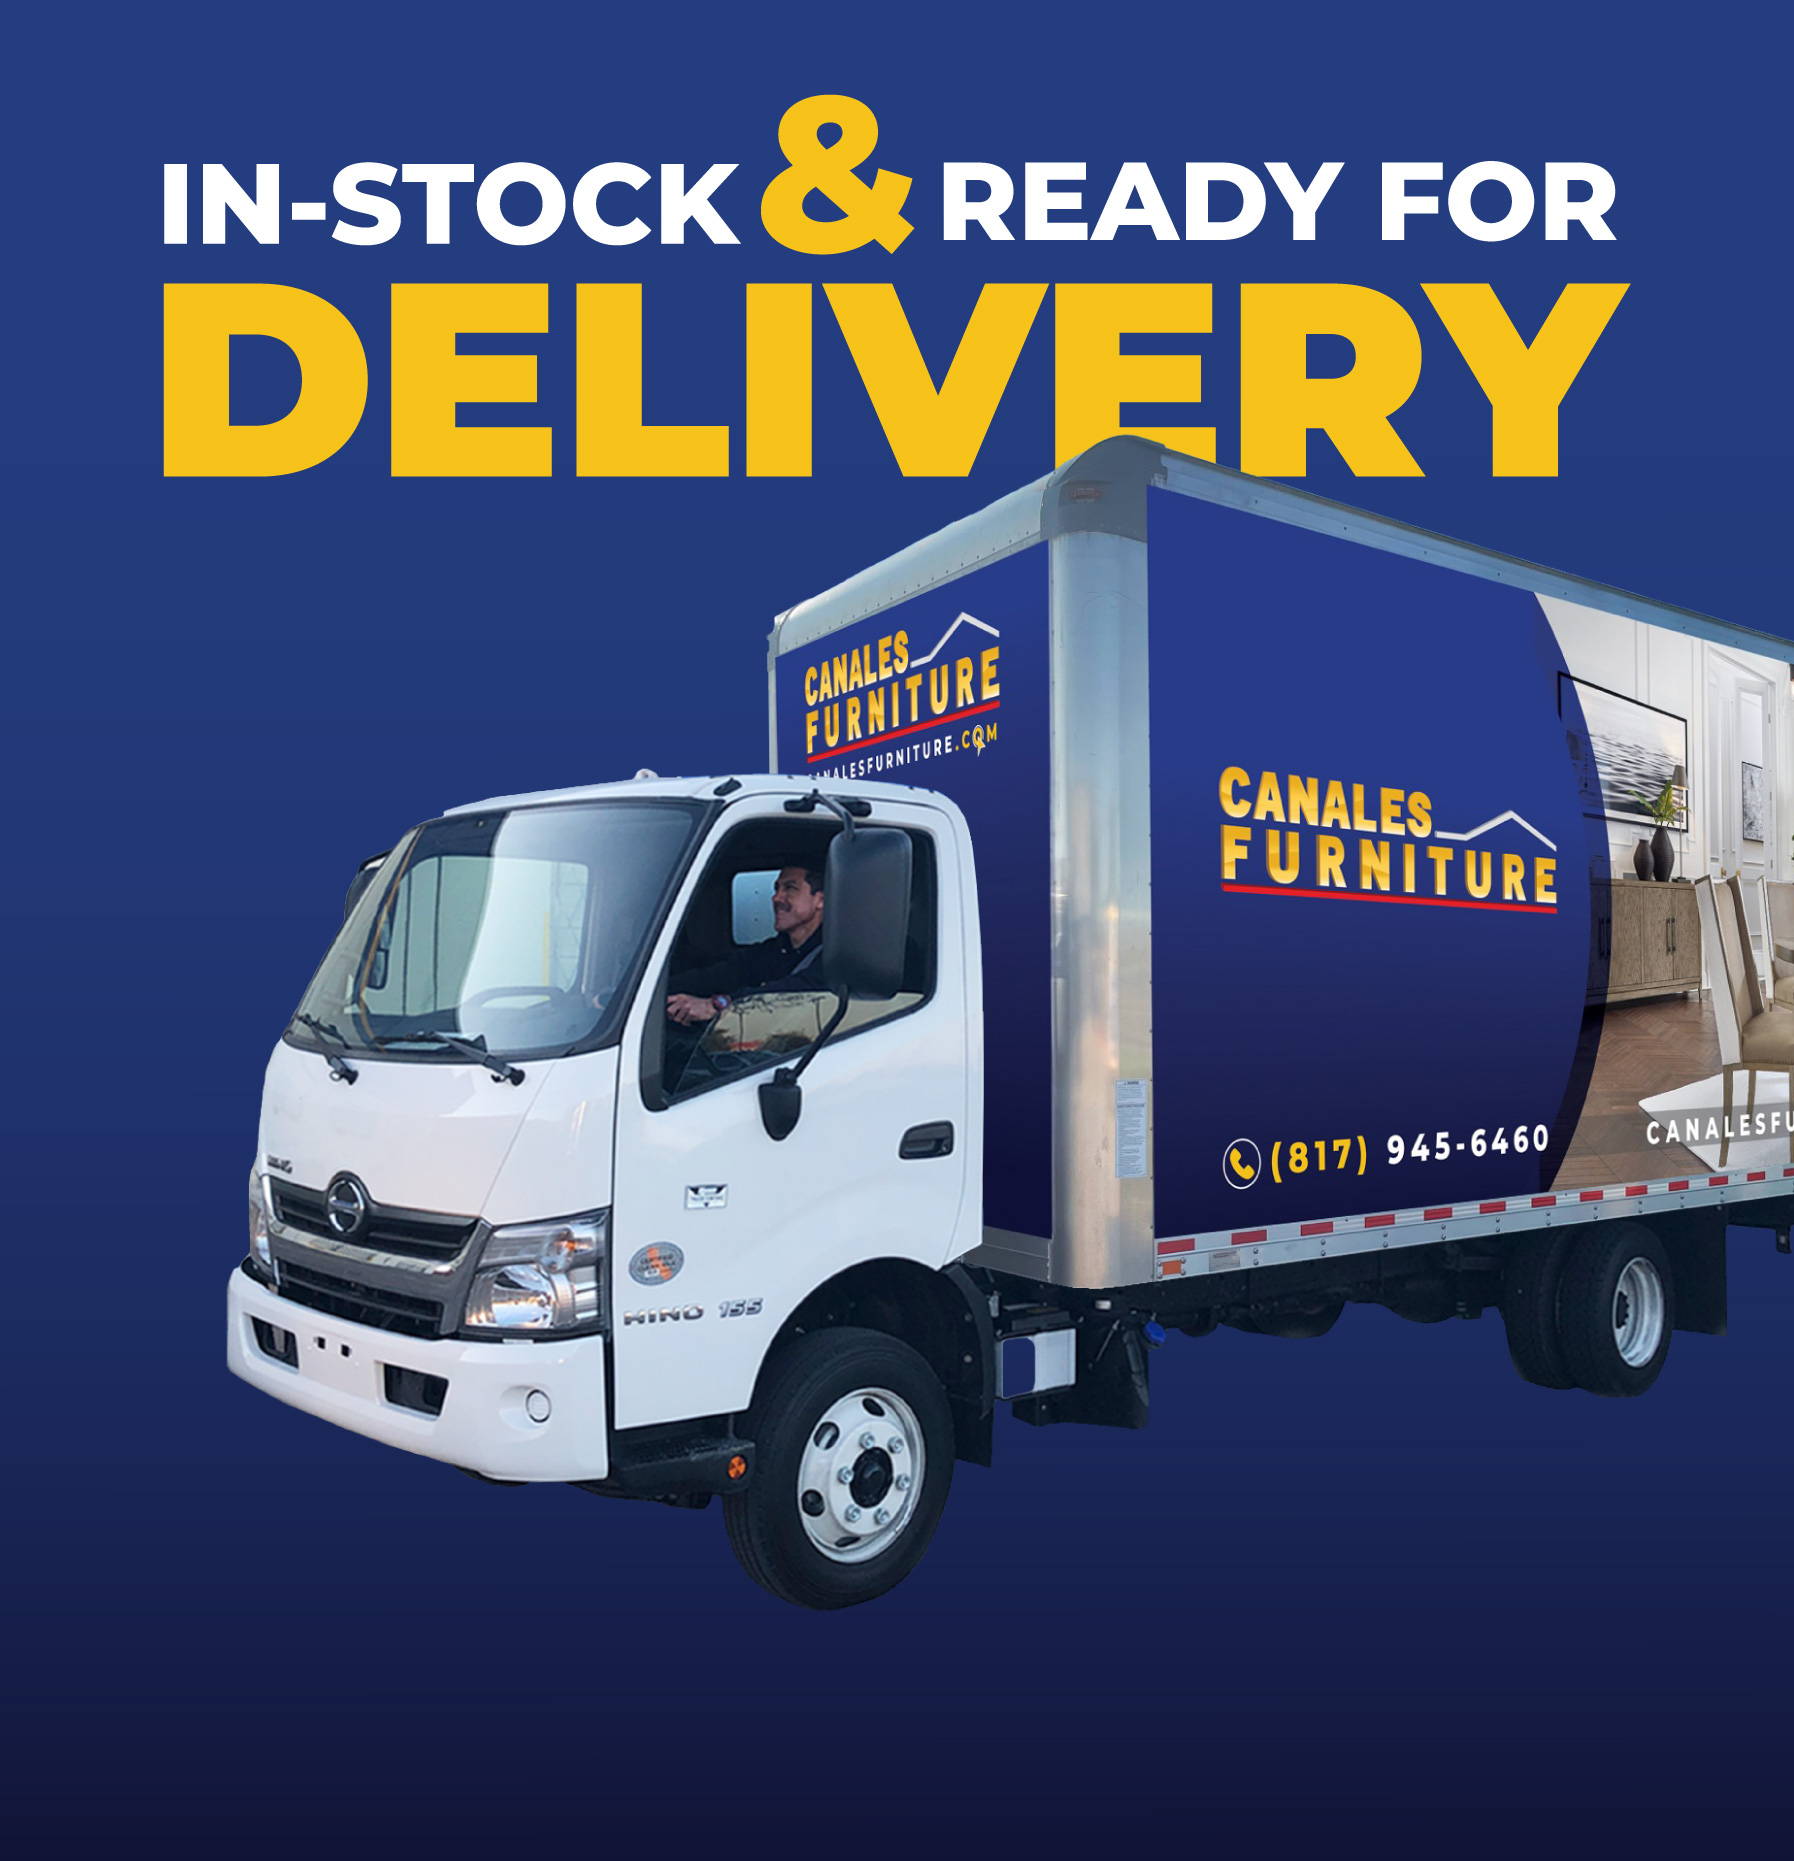 Delivery truck with “in-stock and ready for delivery” message. Click to explore all in-stock items.